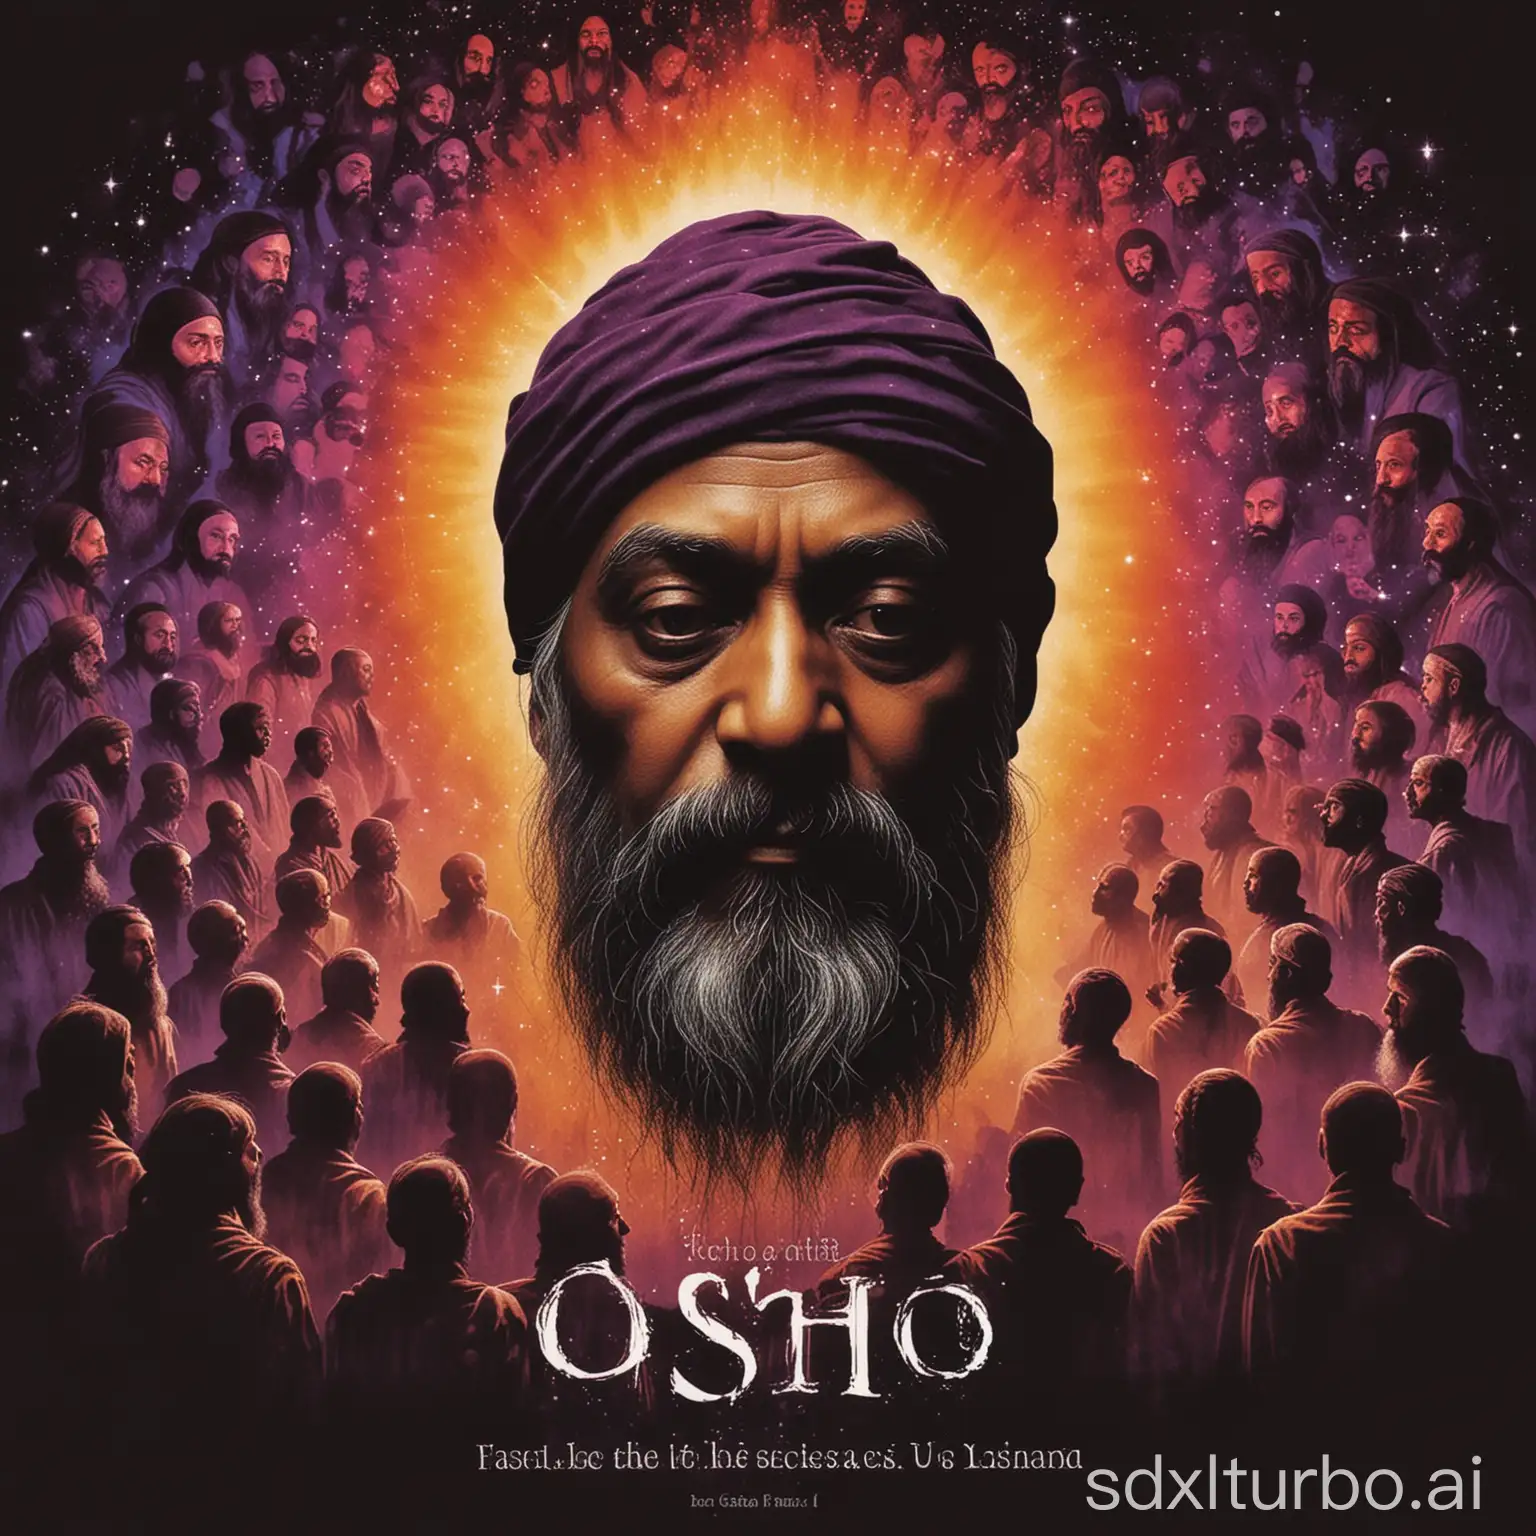 Spiritual-Leader-Osho-and-His-Disciples-in-Radiant-Silhouette-on-Book-Cover